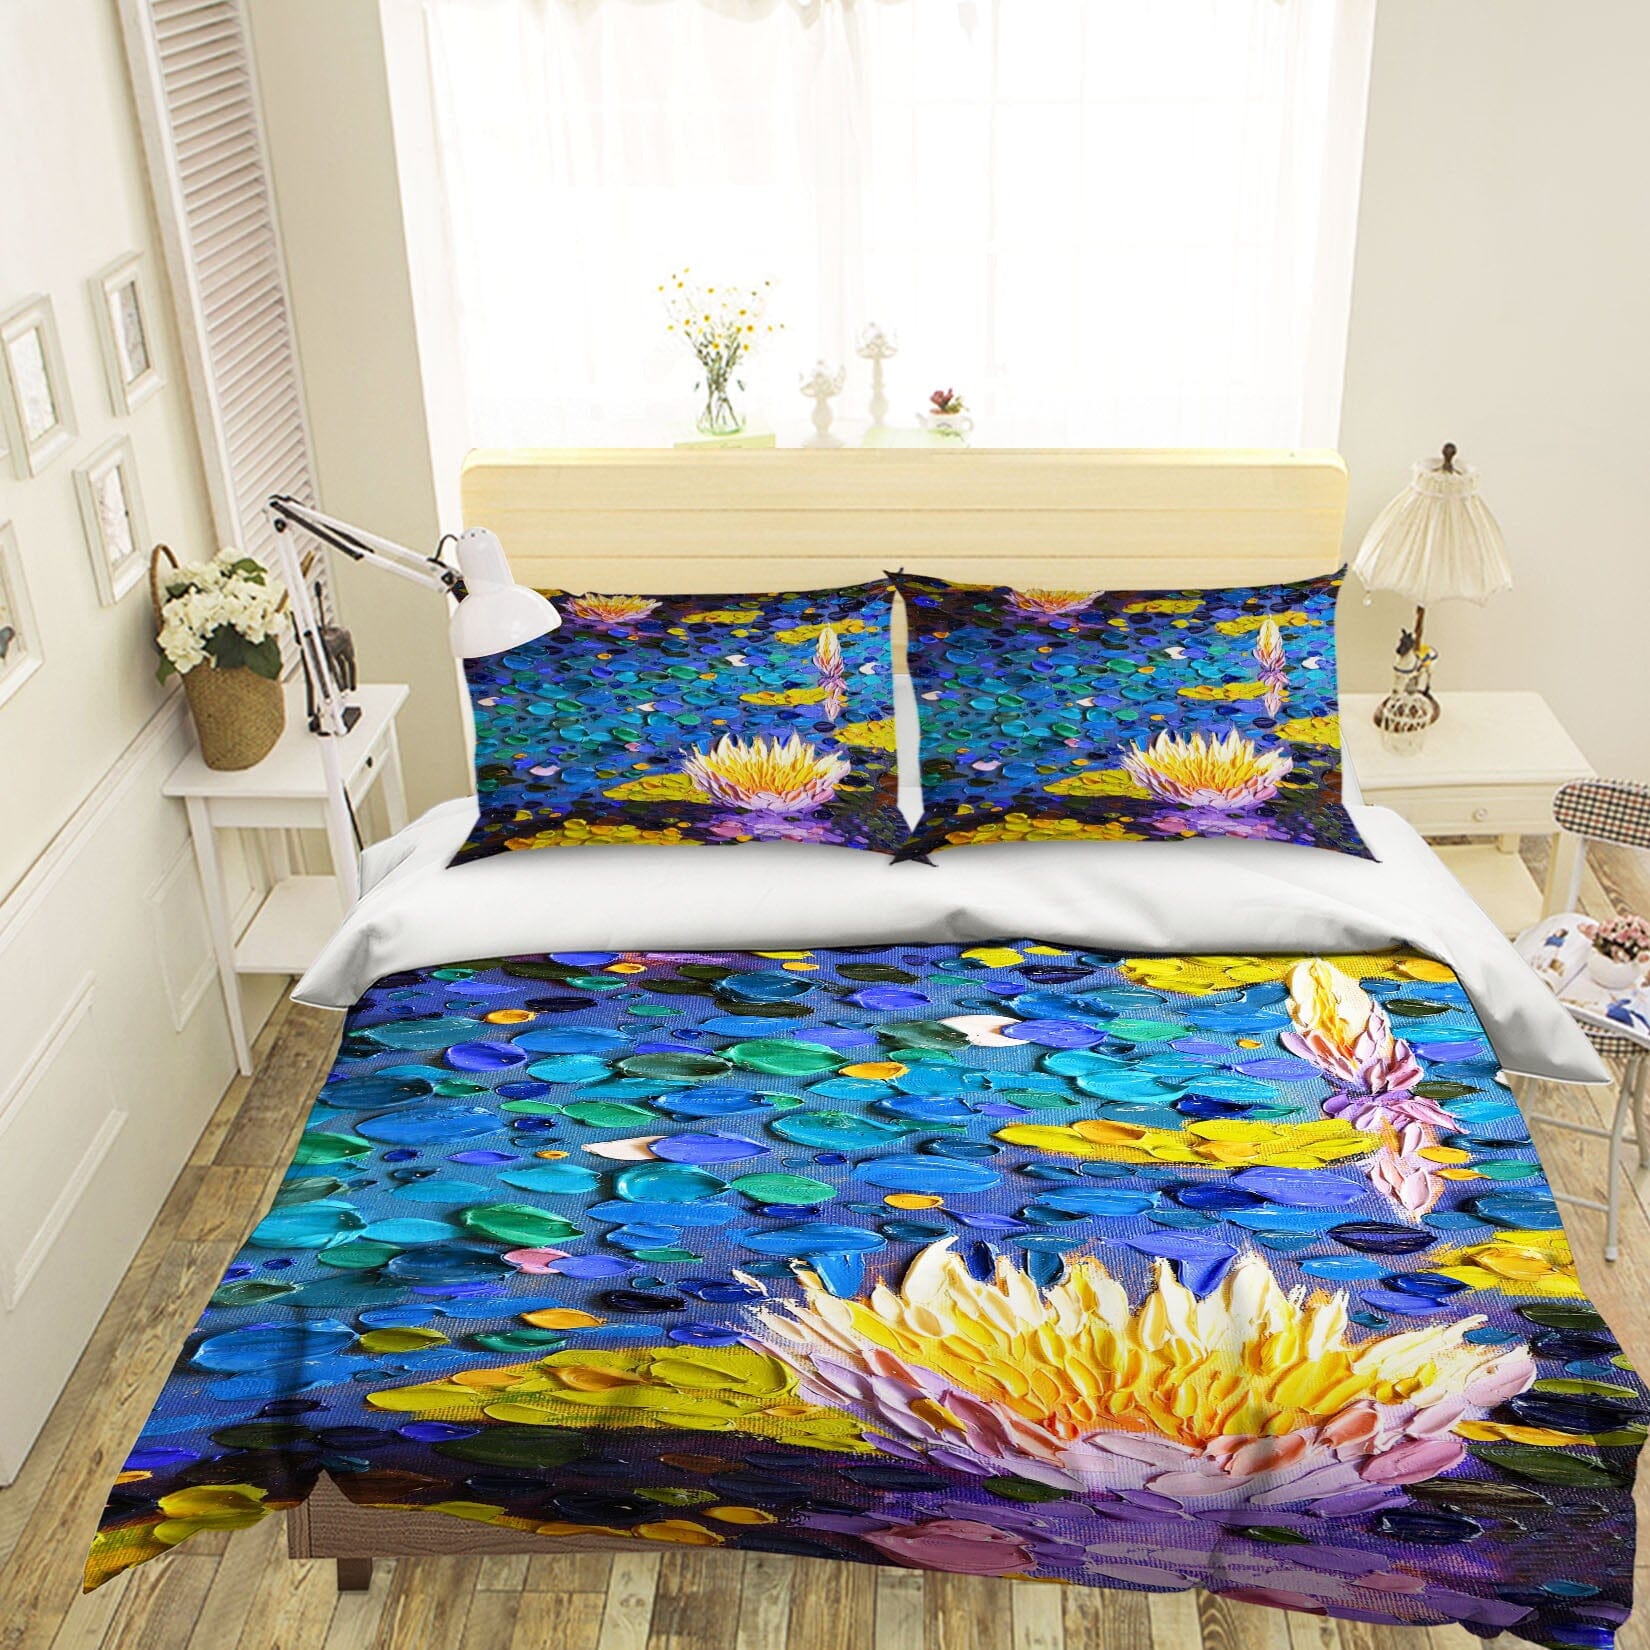 3D Water Lily 2122 Dena Tollefson bedding Bed Pillowcases Quilt Quiet Covers AJ Creativity Home 